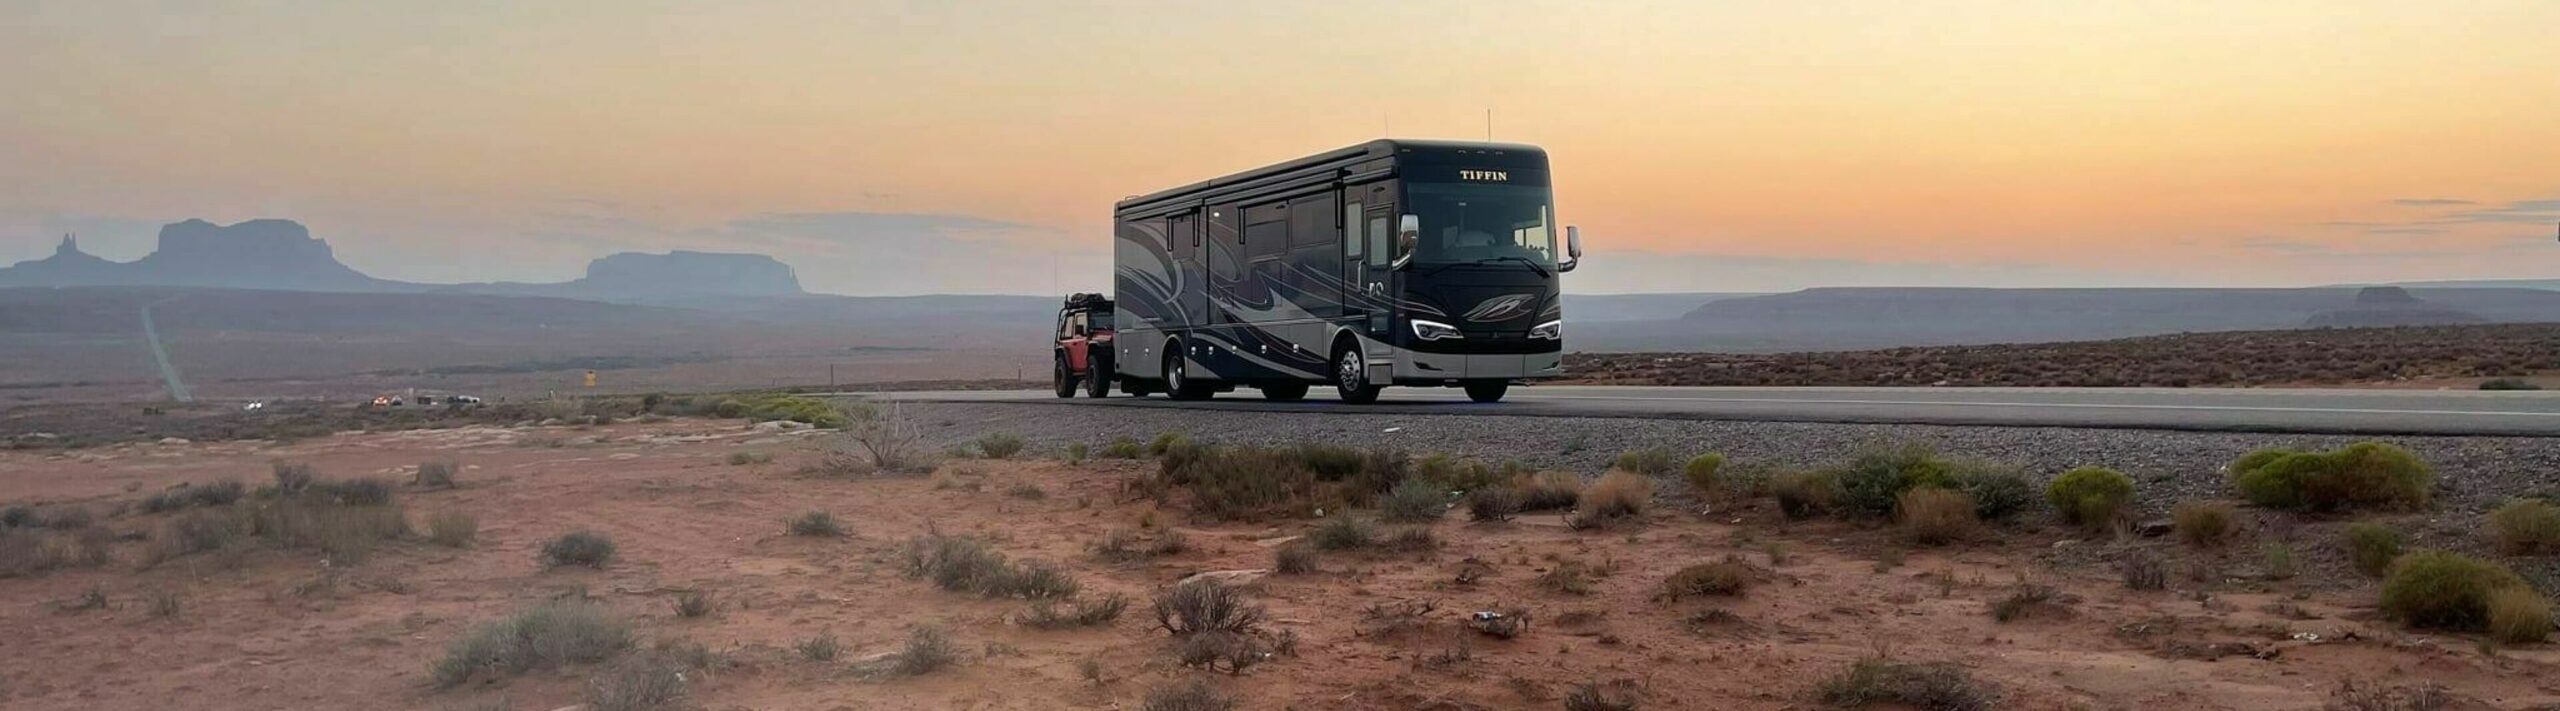 Tiffin Motorhome on the Road